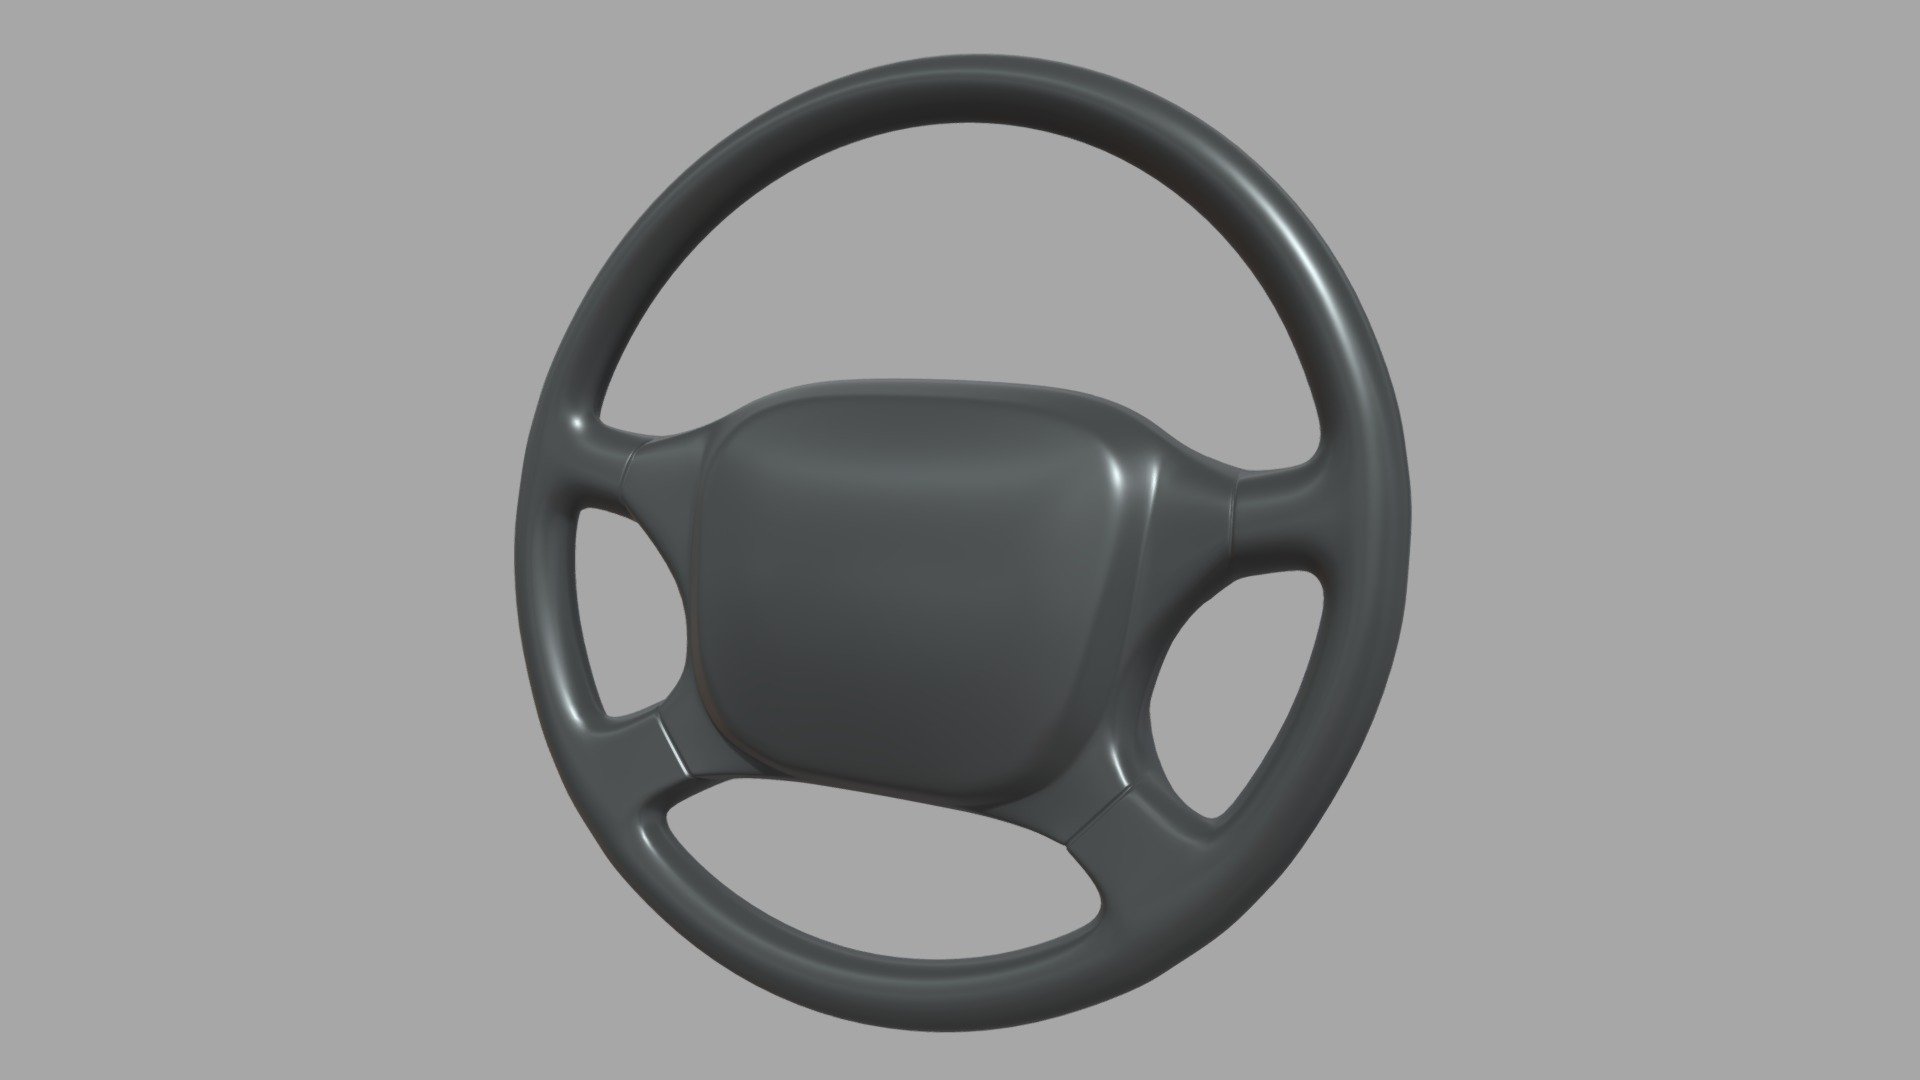 This model contains an Steering Wheel Car 03 based on a real stylized steering wheel from a real car which i modeled in Maya 2018.This model is perfect to create a new great scene with different car pieces or part of a car model.

This model could be available for the 3D printing, the STL is added and work correctly in Ultimaker Cura. If you have any problem contact me.

The model is ready as one unique part and ready for being a great CGI model and also a 3D printable model.

This model is one of a great collection of car parts i published in my profile, which is available for buying.

If you need any kind of help contact me, i will help you with everything i can. If you like the model please give me some feedback, I would appreciate it.

Don’t doubt on contacting me, i would be very happy to help. If you experience any kind of difficulties, be sure to contact me and i will help you. Sincerely Yours, ViperJr3D - Steering Wheel Car 03 - Buy Royalty Free 3D model by ViperJr3D 3d model